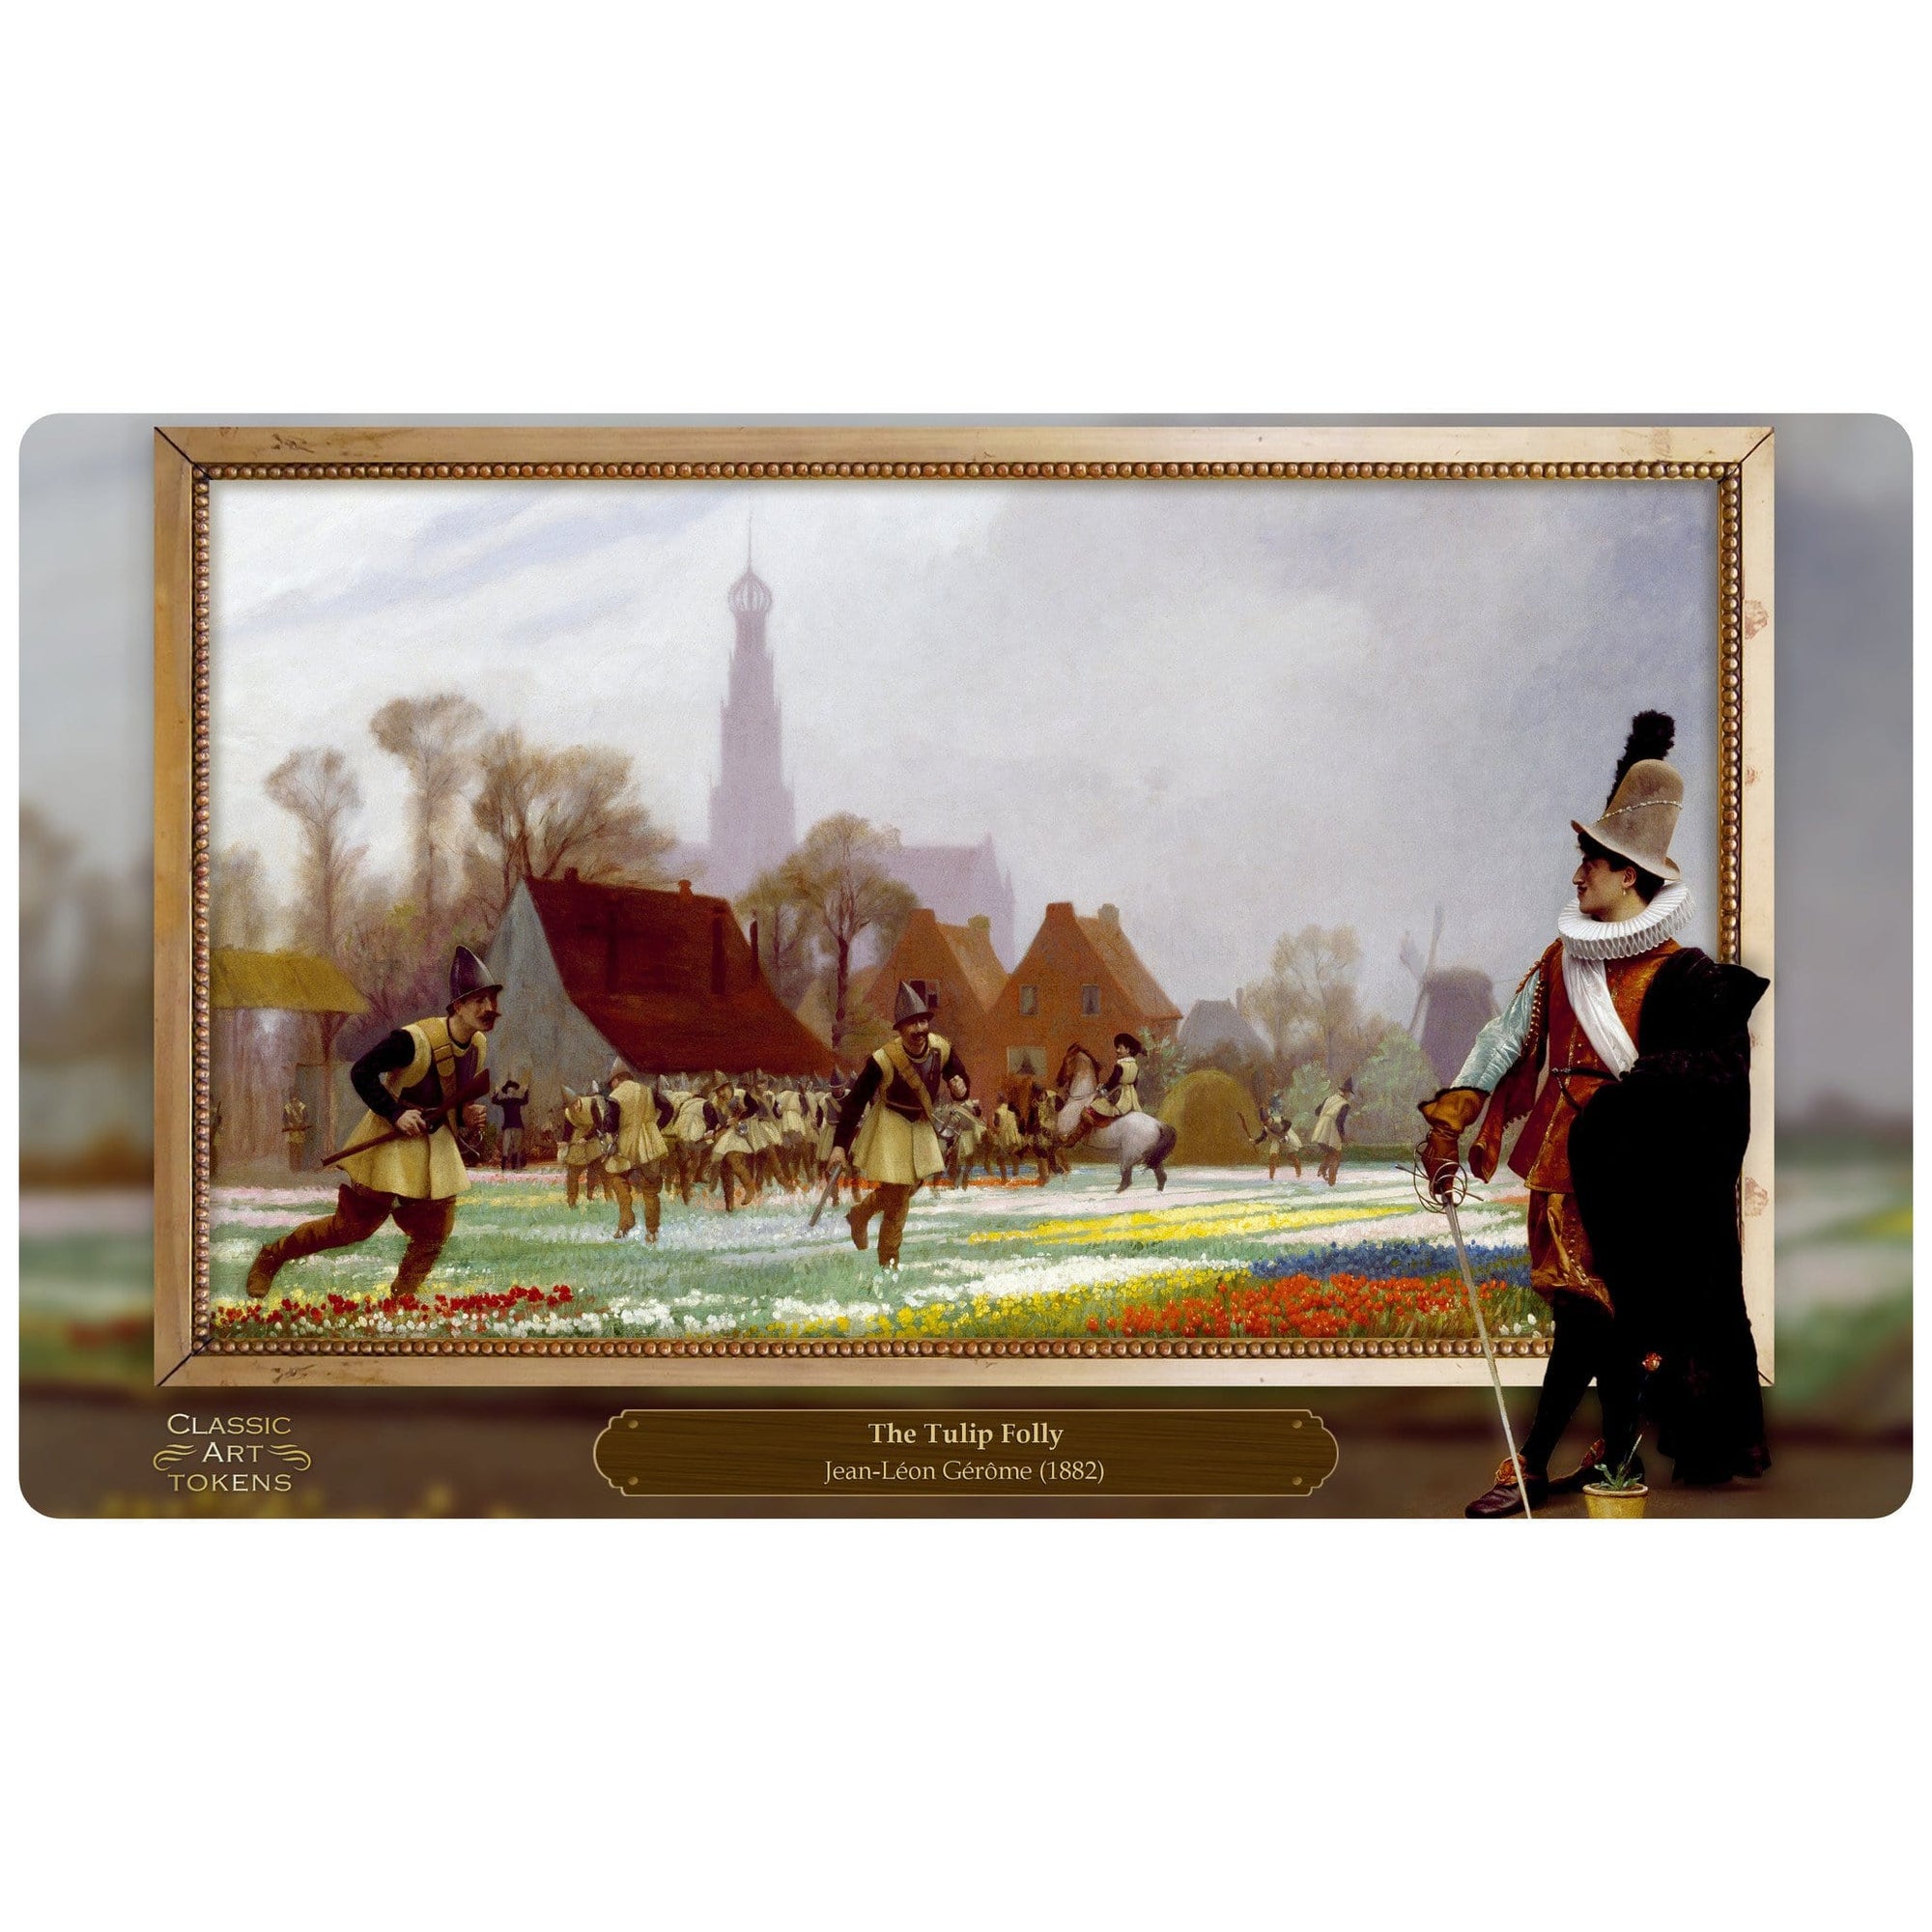 Soldier Playmat by Jean-Léon Gérôme - Playmat - Original Magic Art - Accessories for Magic the Gathering and other card games